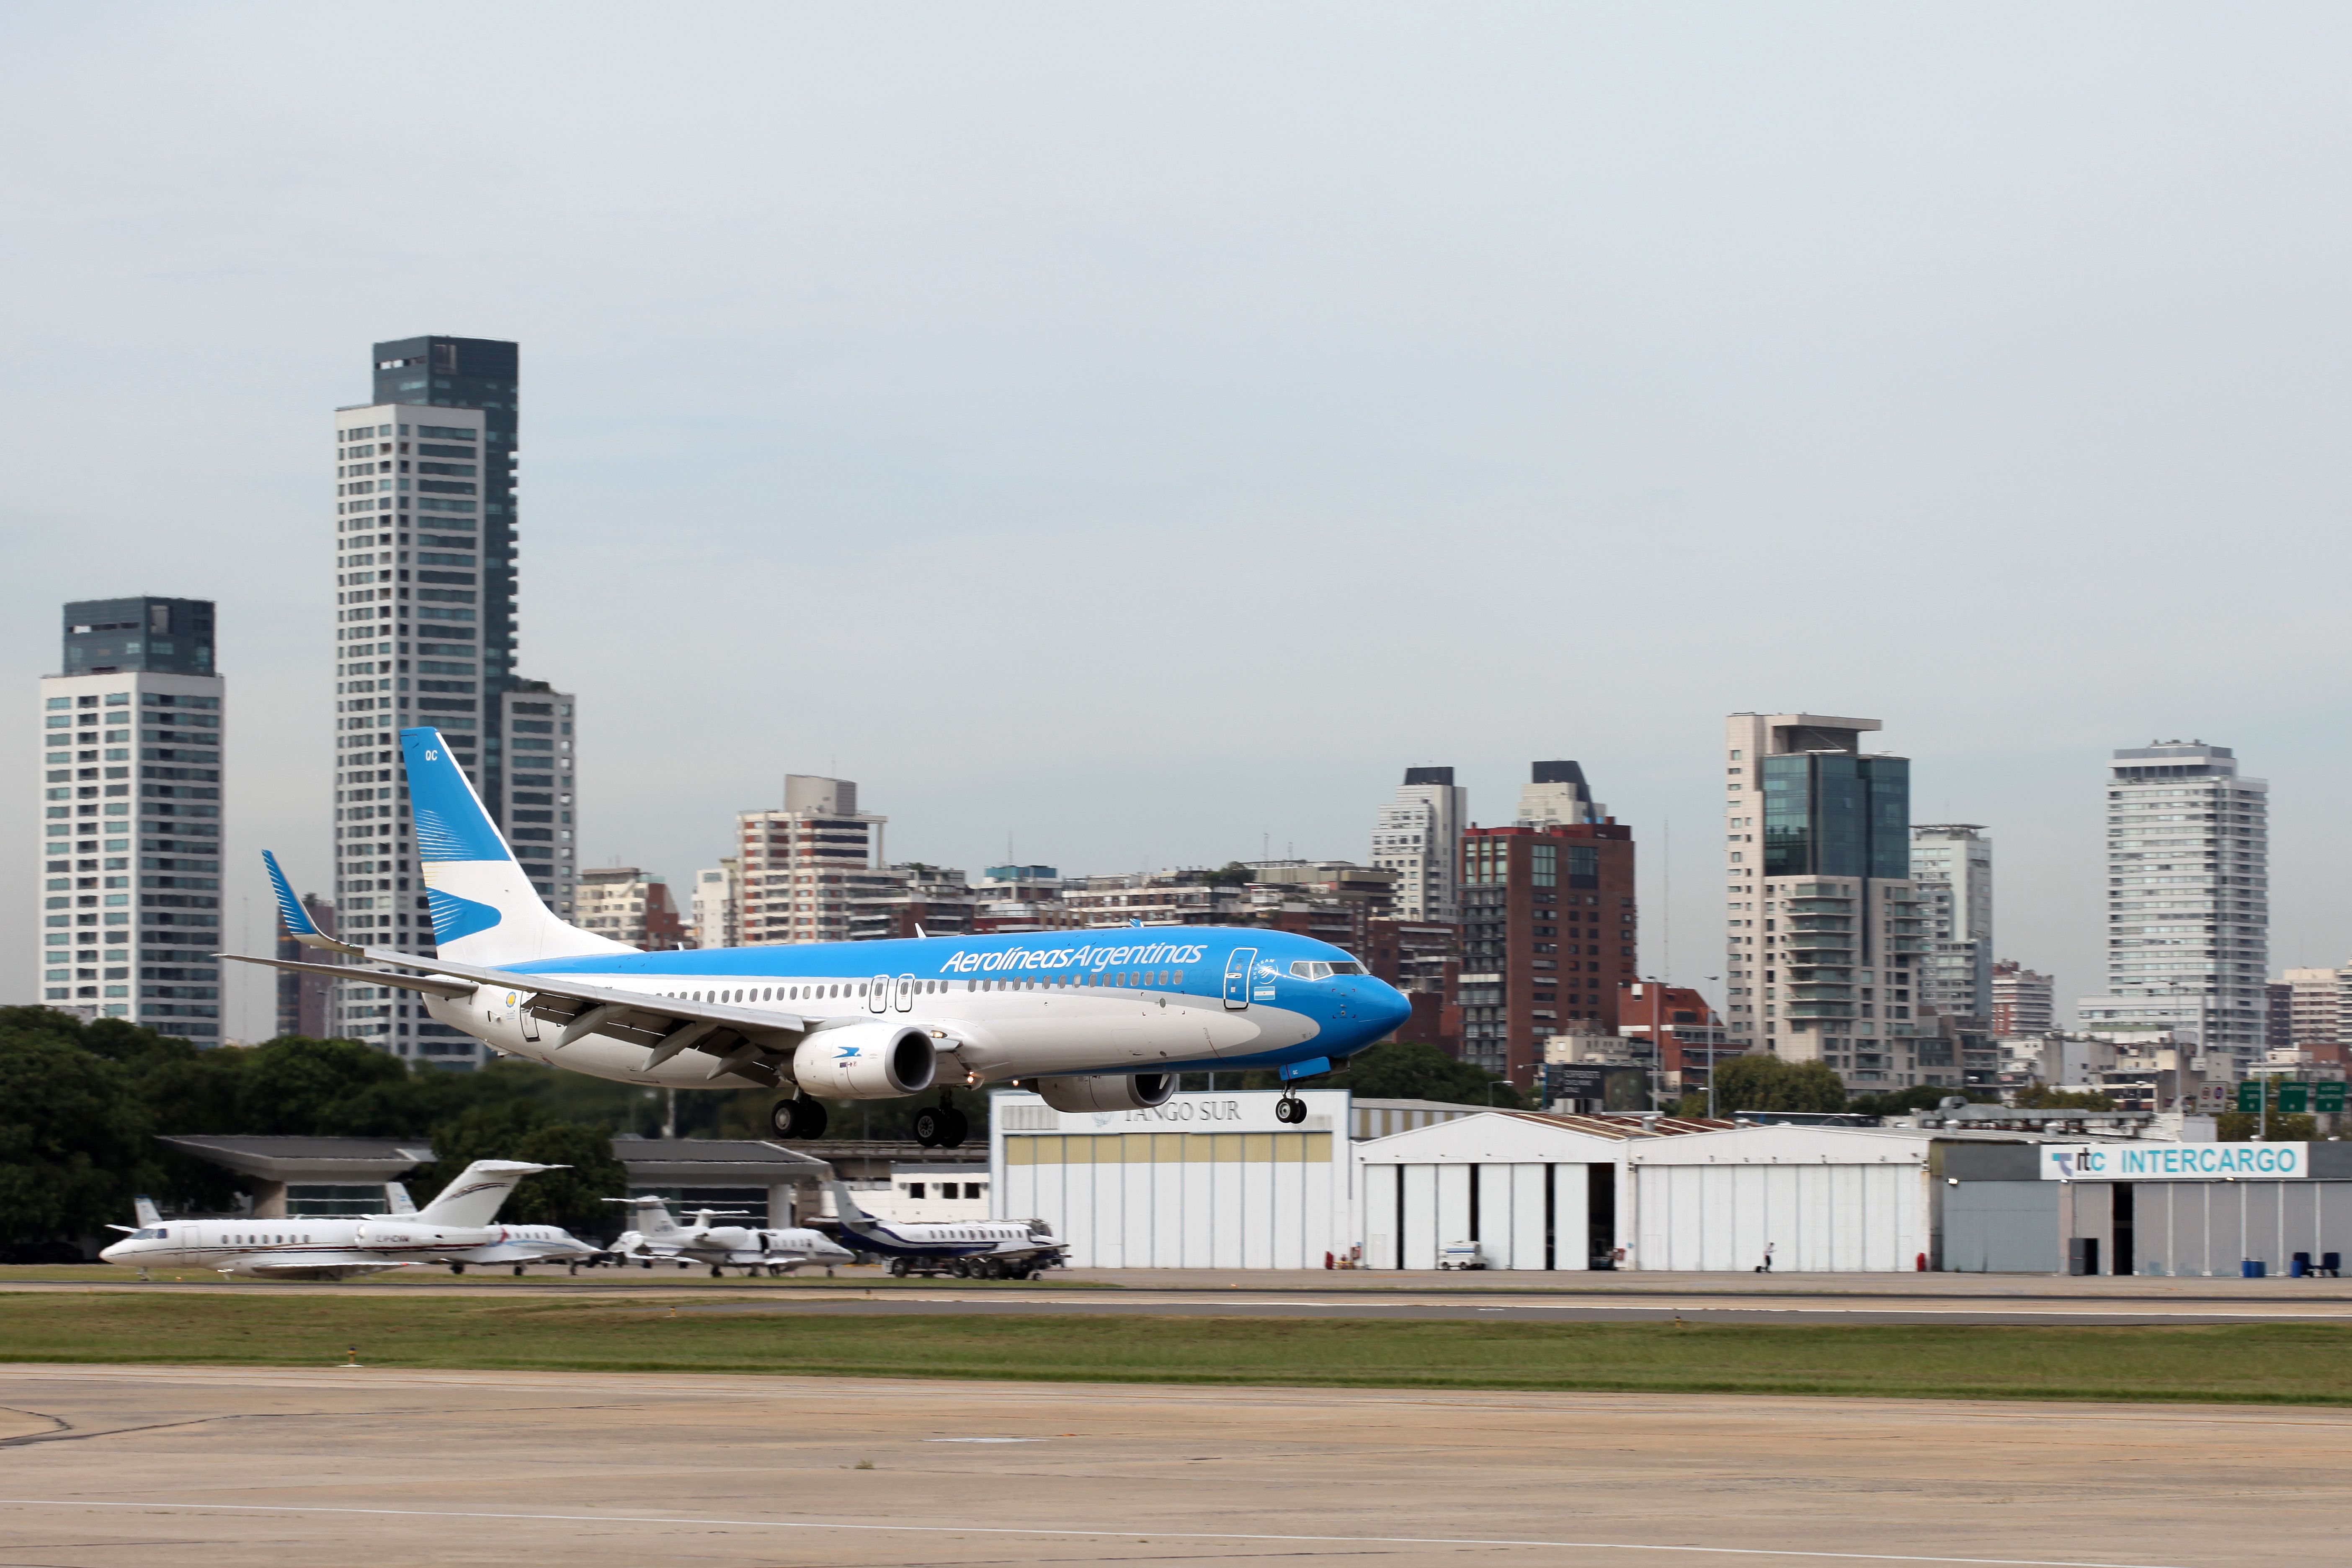 An Aerolíneas Argentinas airplane about to land on a runway.